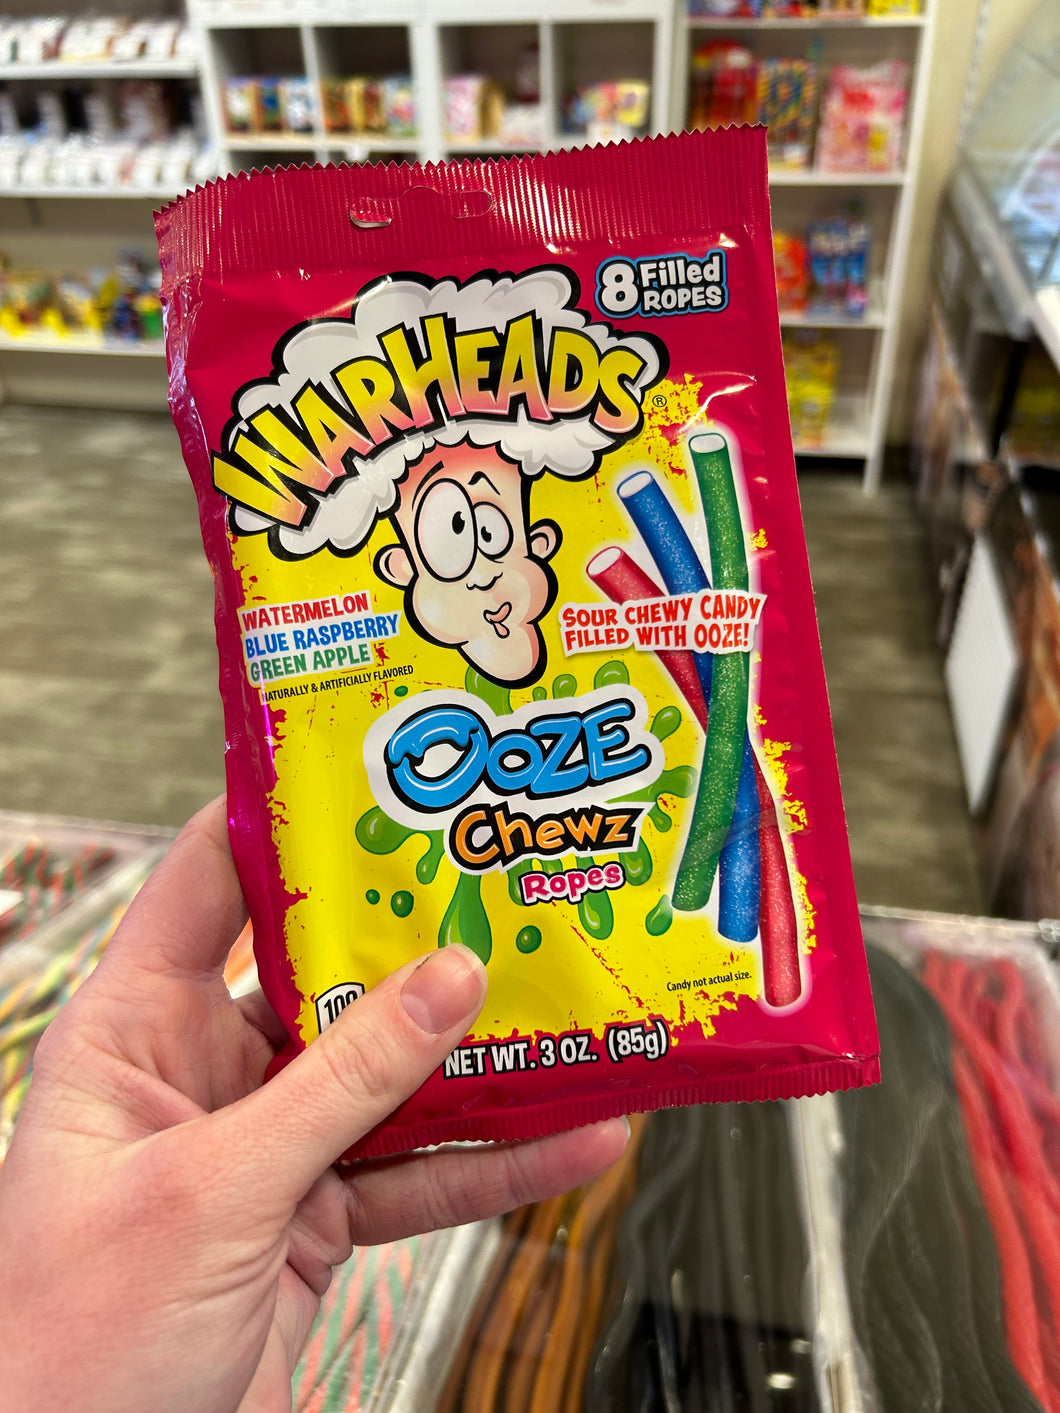 Warheads Ooze Chew Ropes